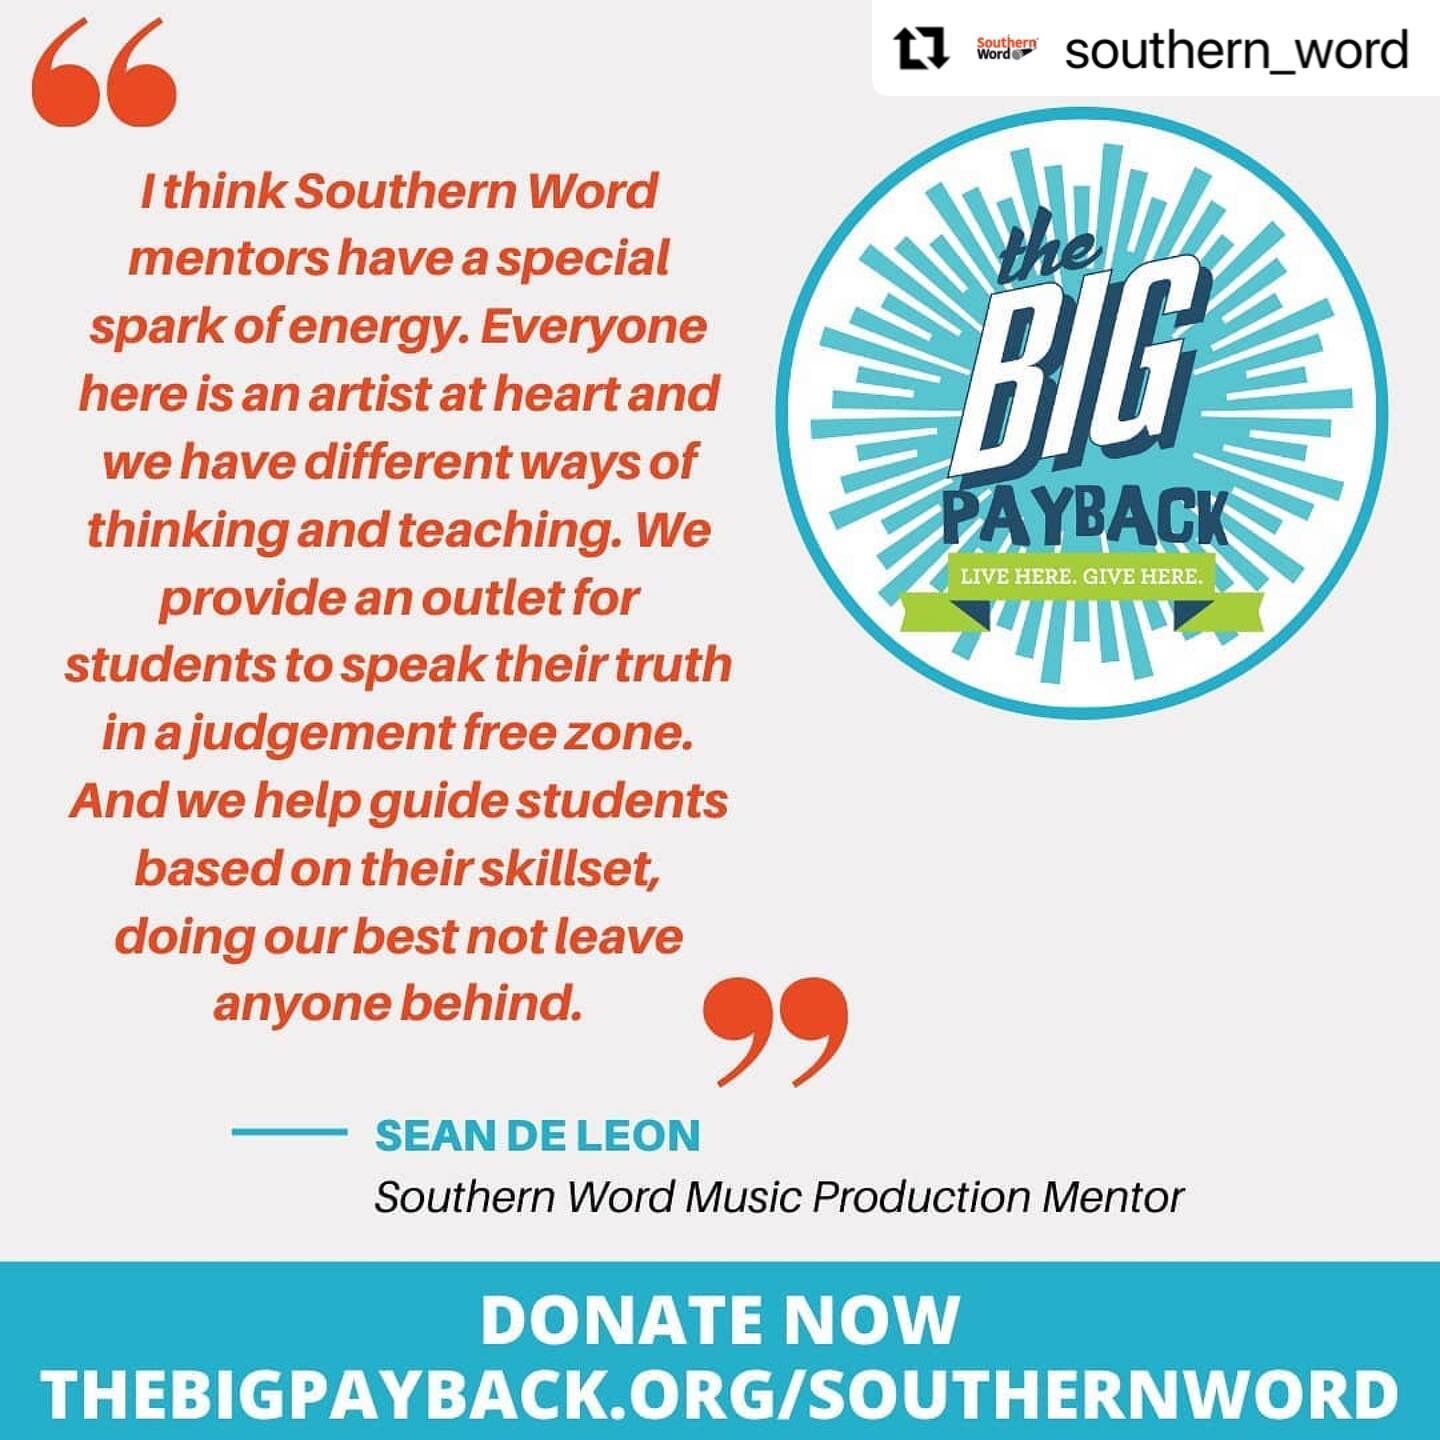 #Repost @southern_word
・・・
Southern Word mentors have the unique ability to reach youth...maybe it&rsquo;s that they&rsquo;re all artists at heart or maybe it&rsquo;s the safe spaces they create. Whatever the reason, your donation helps us place writ